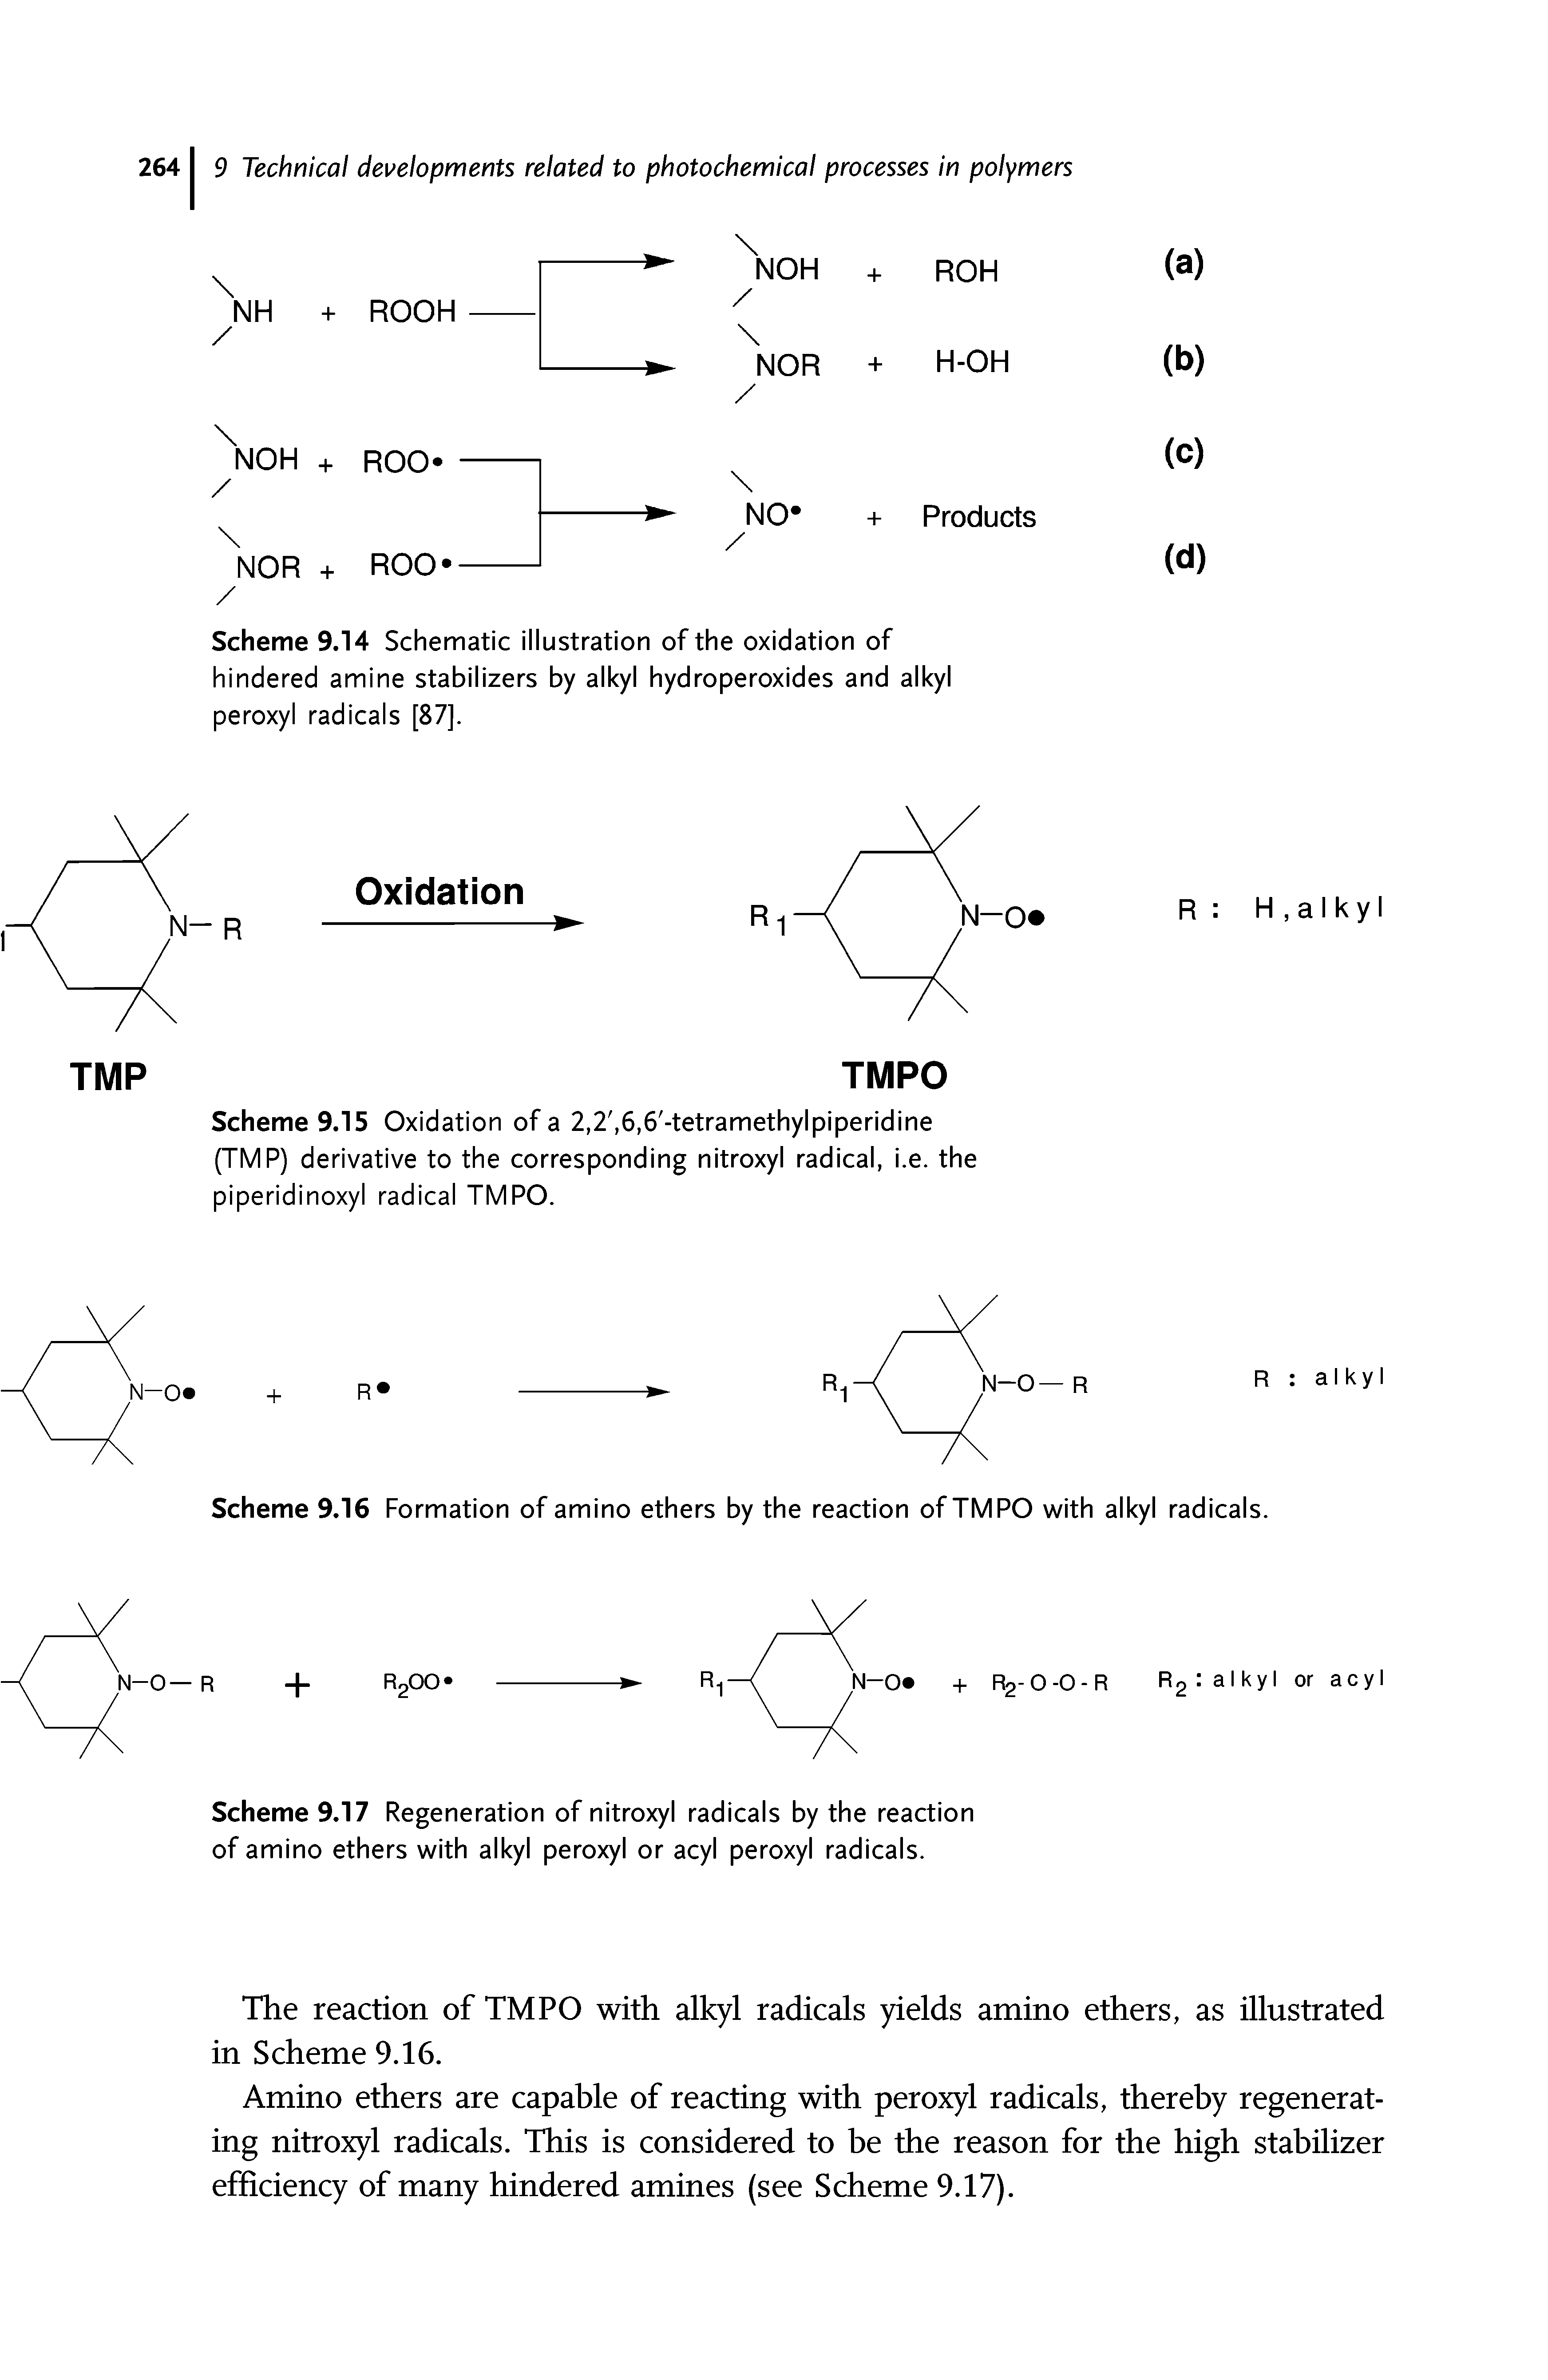 Scheme 9.17 Regeneration of nitroxyl radicals by the reaction of amino ethers with alkyl peroxyl or acyl peroxyl radicals.